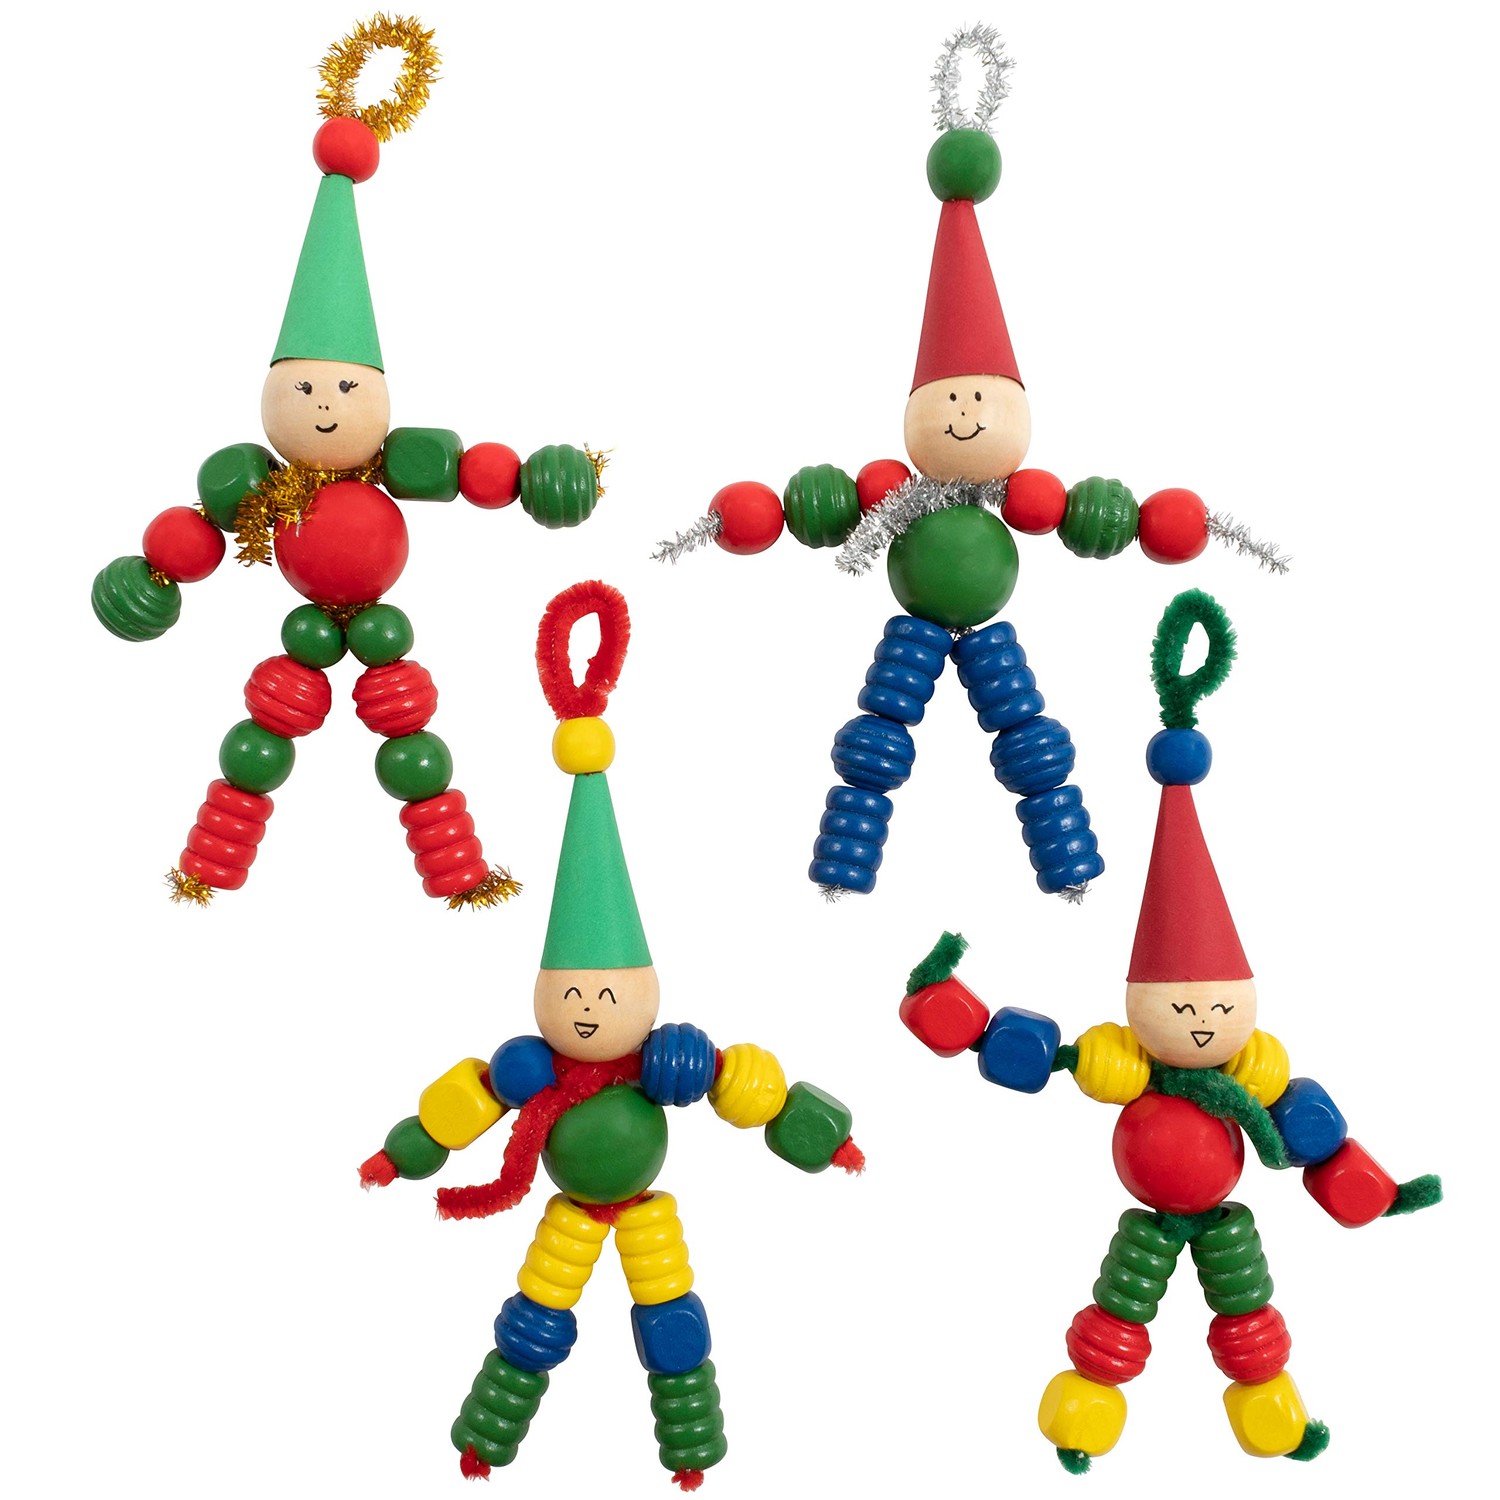 READY 2 LEARN Dough Character Accessories - Set of 52 - 21